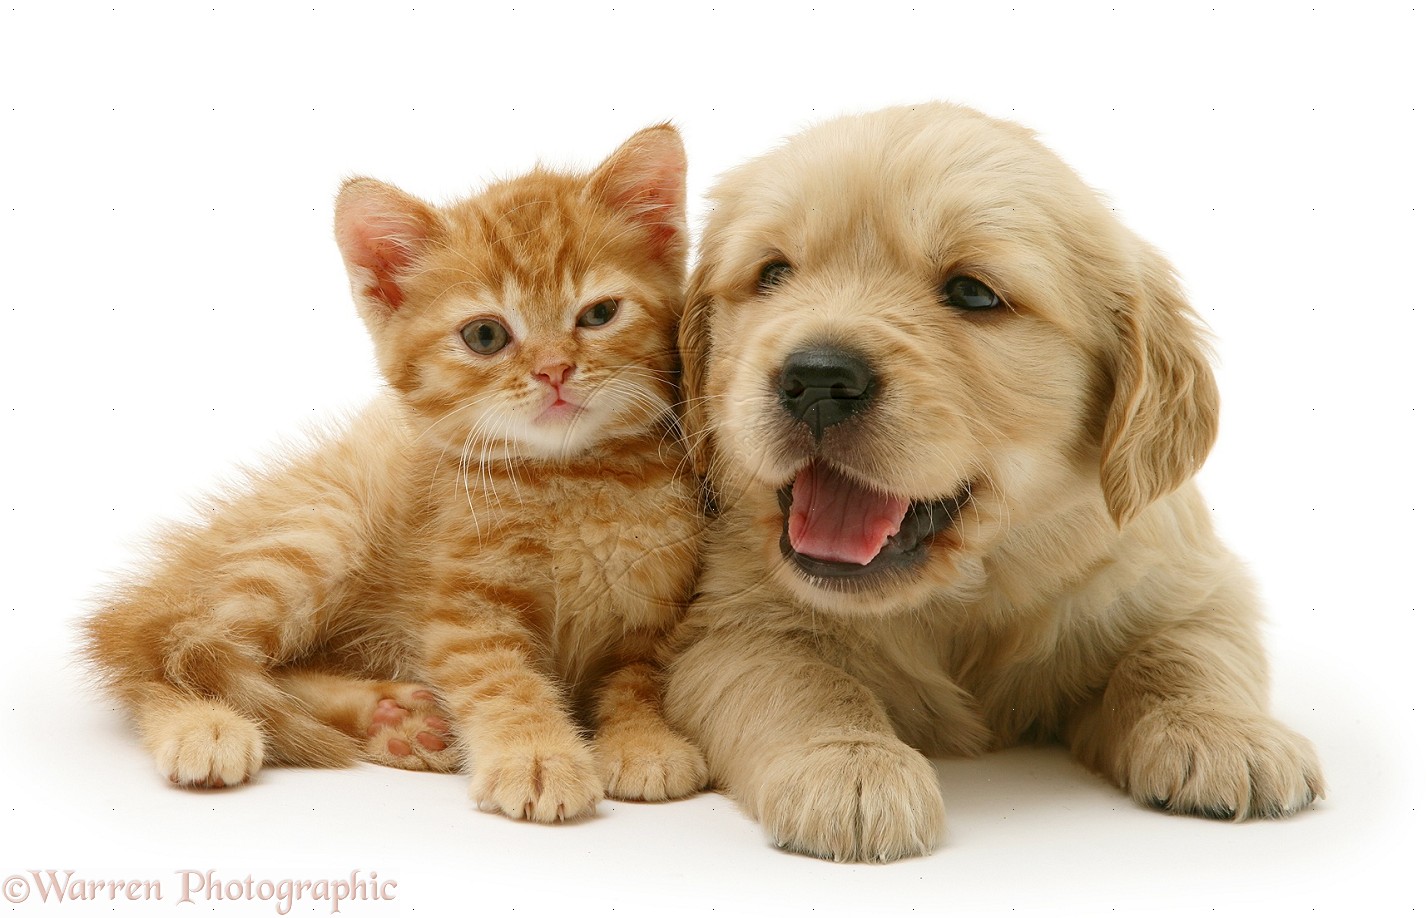 Baby Puppies And Kittens Of